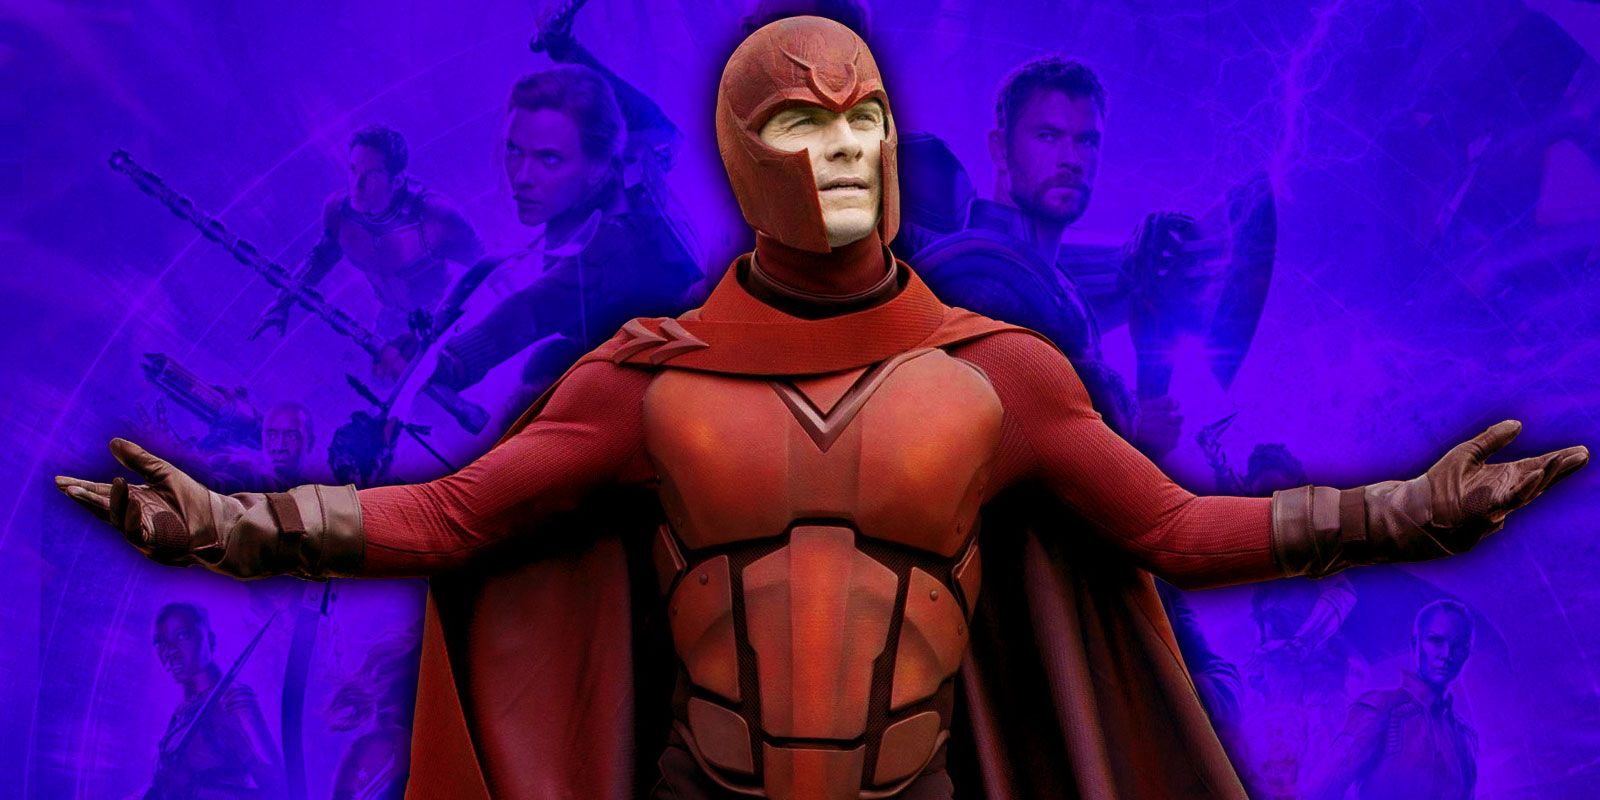 Montage of Michael Fassbender's Magneto over an MCU character poster